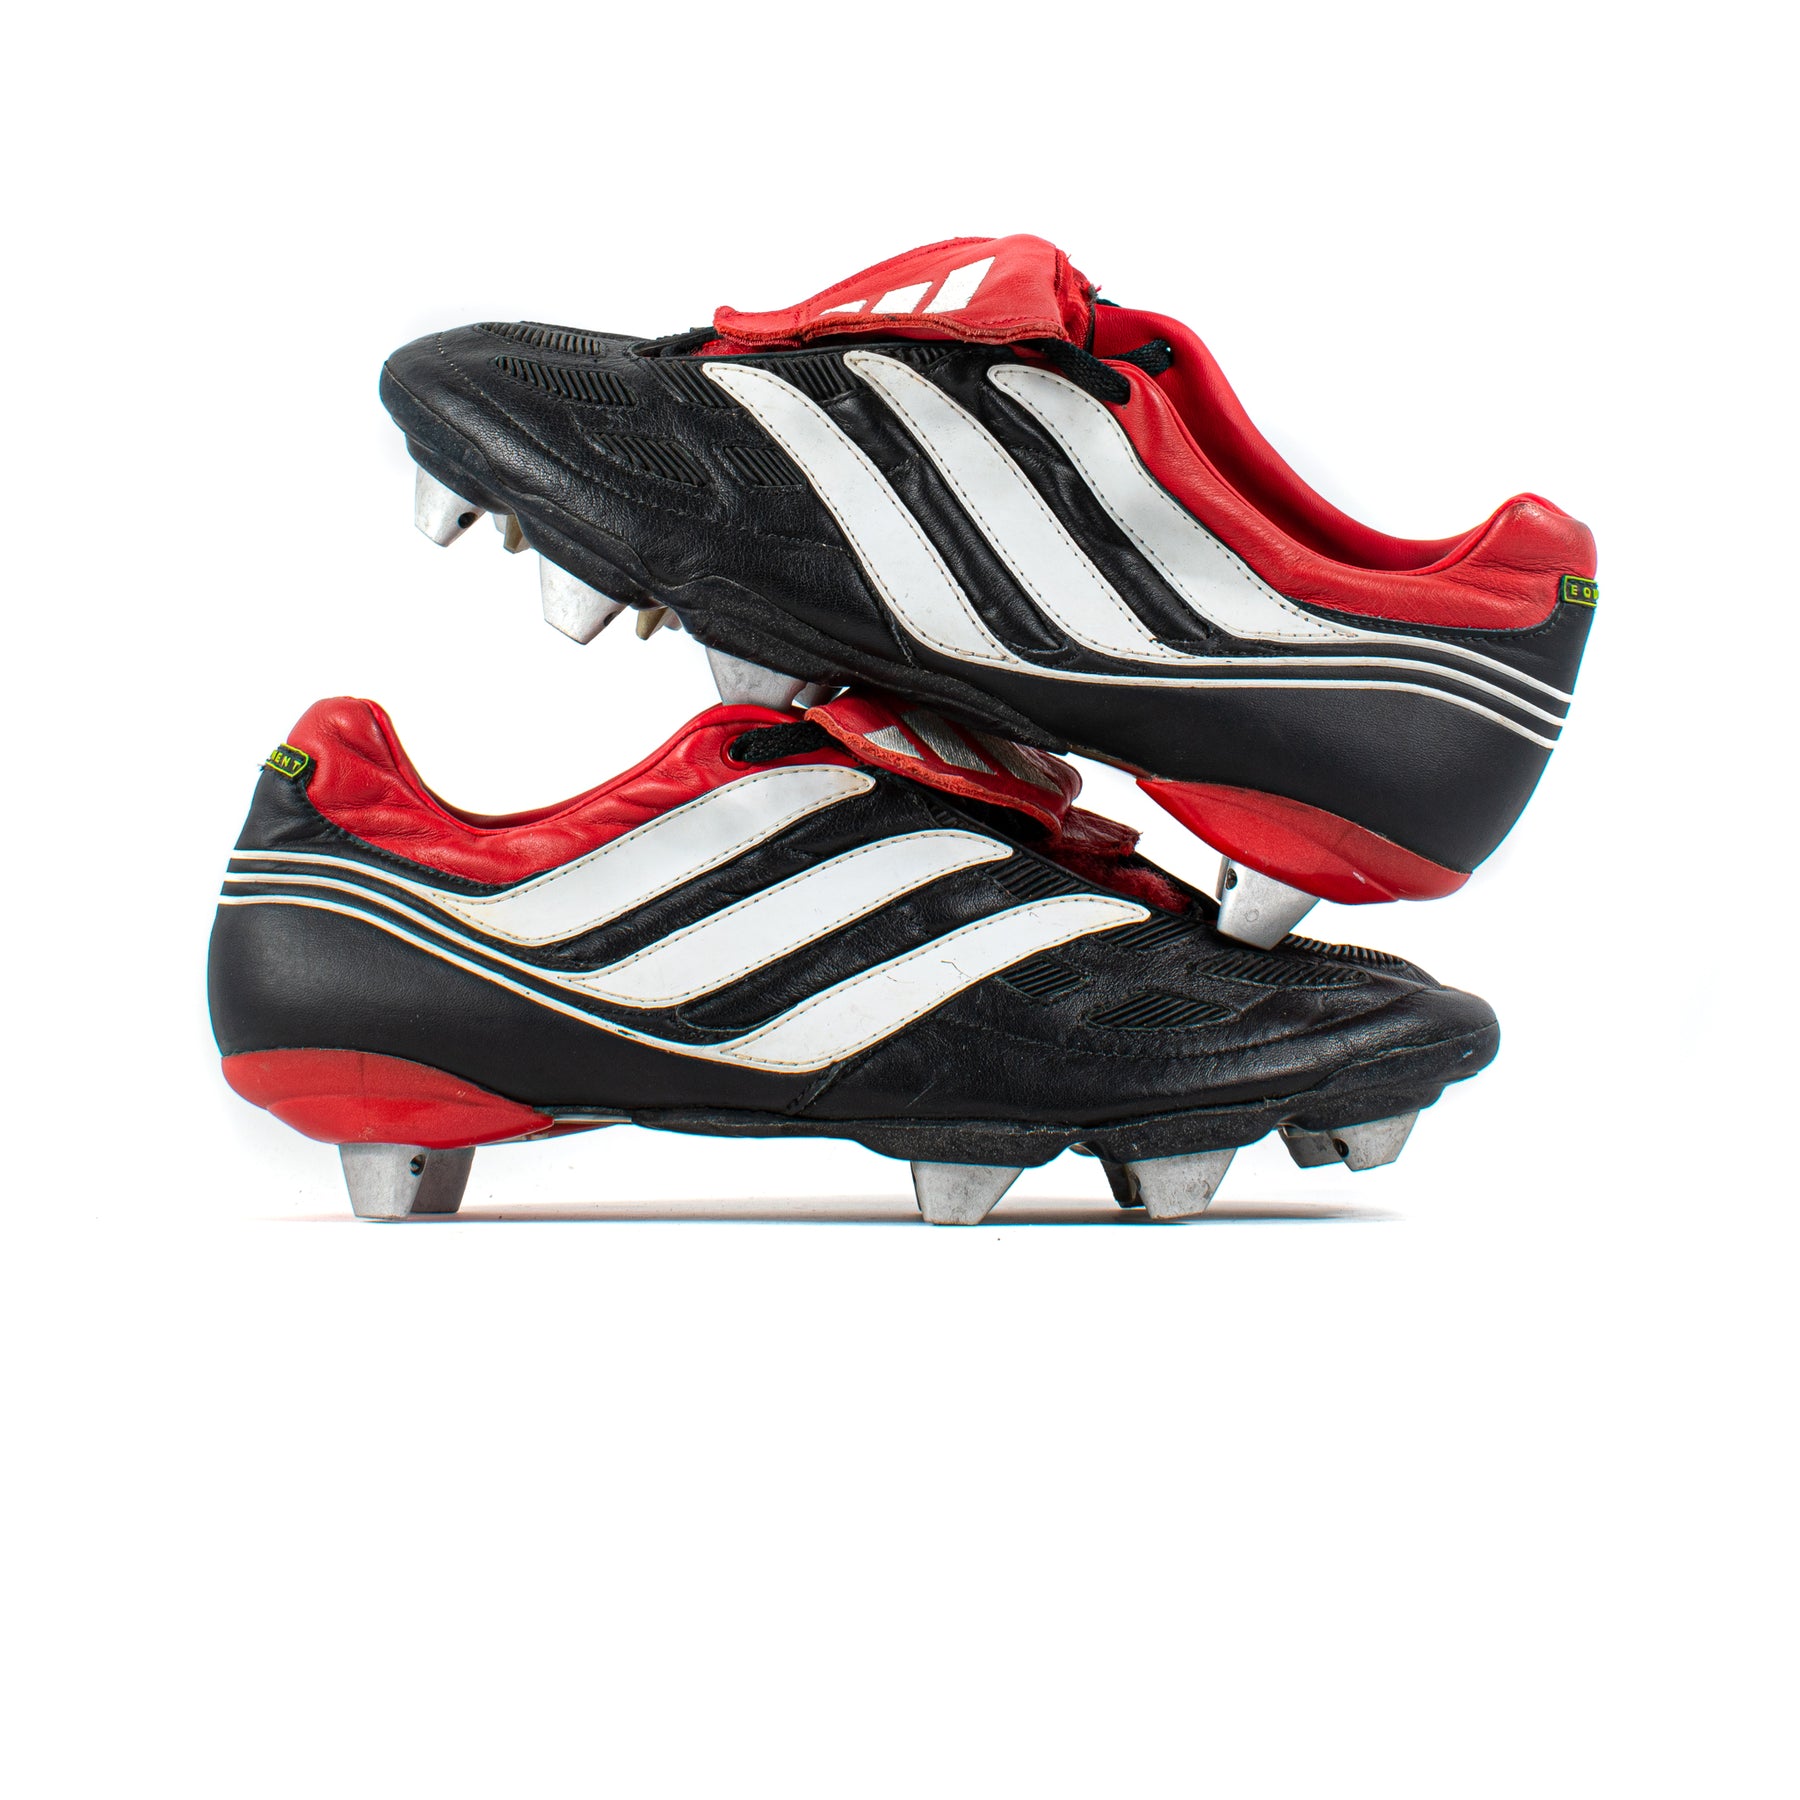 Adidas Precision MIG *Mismatched* – Classic Soccer Cleats